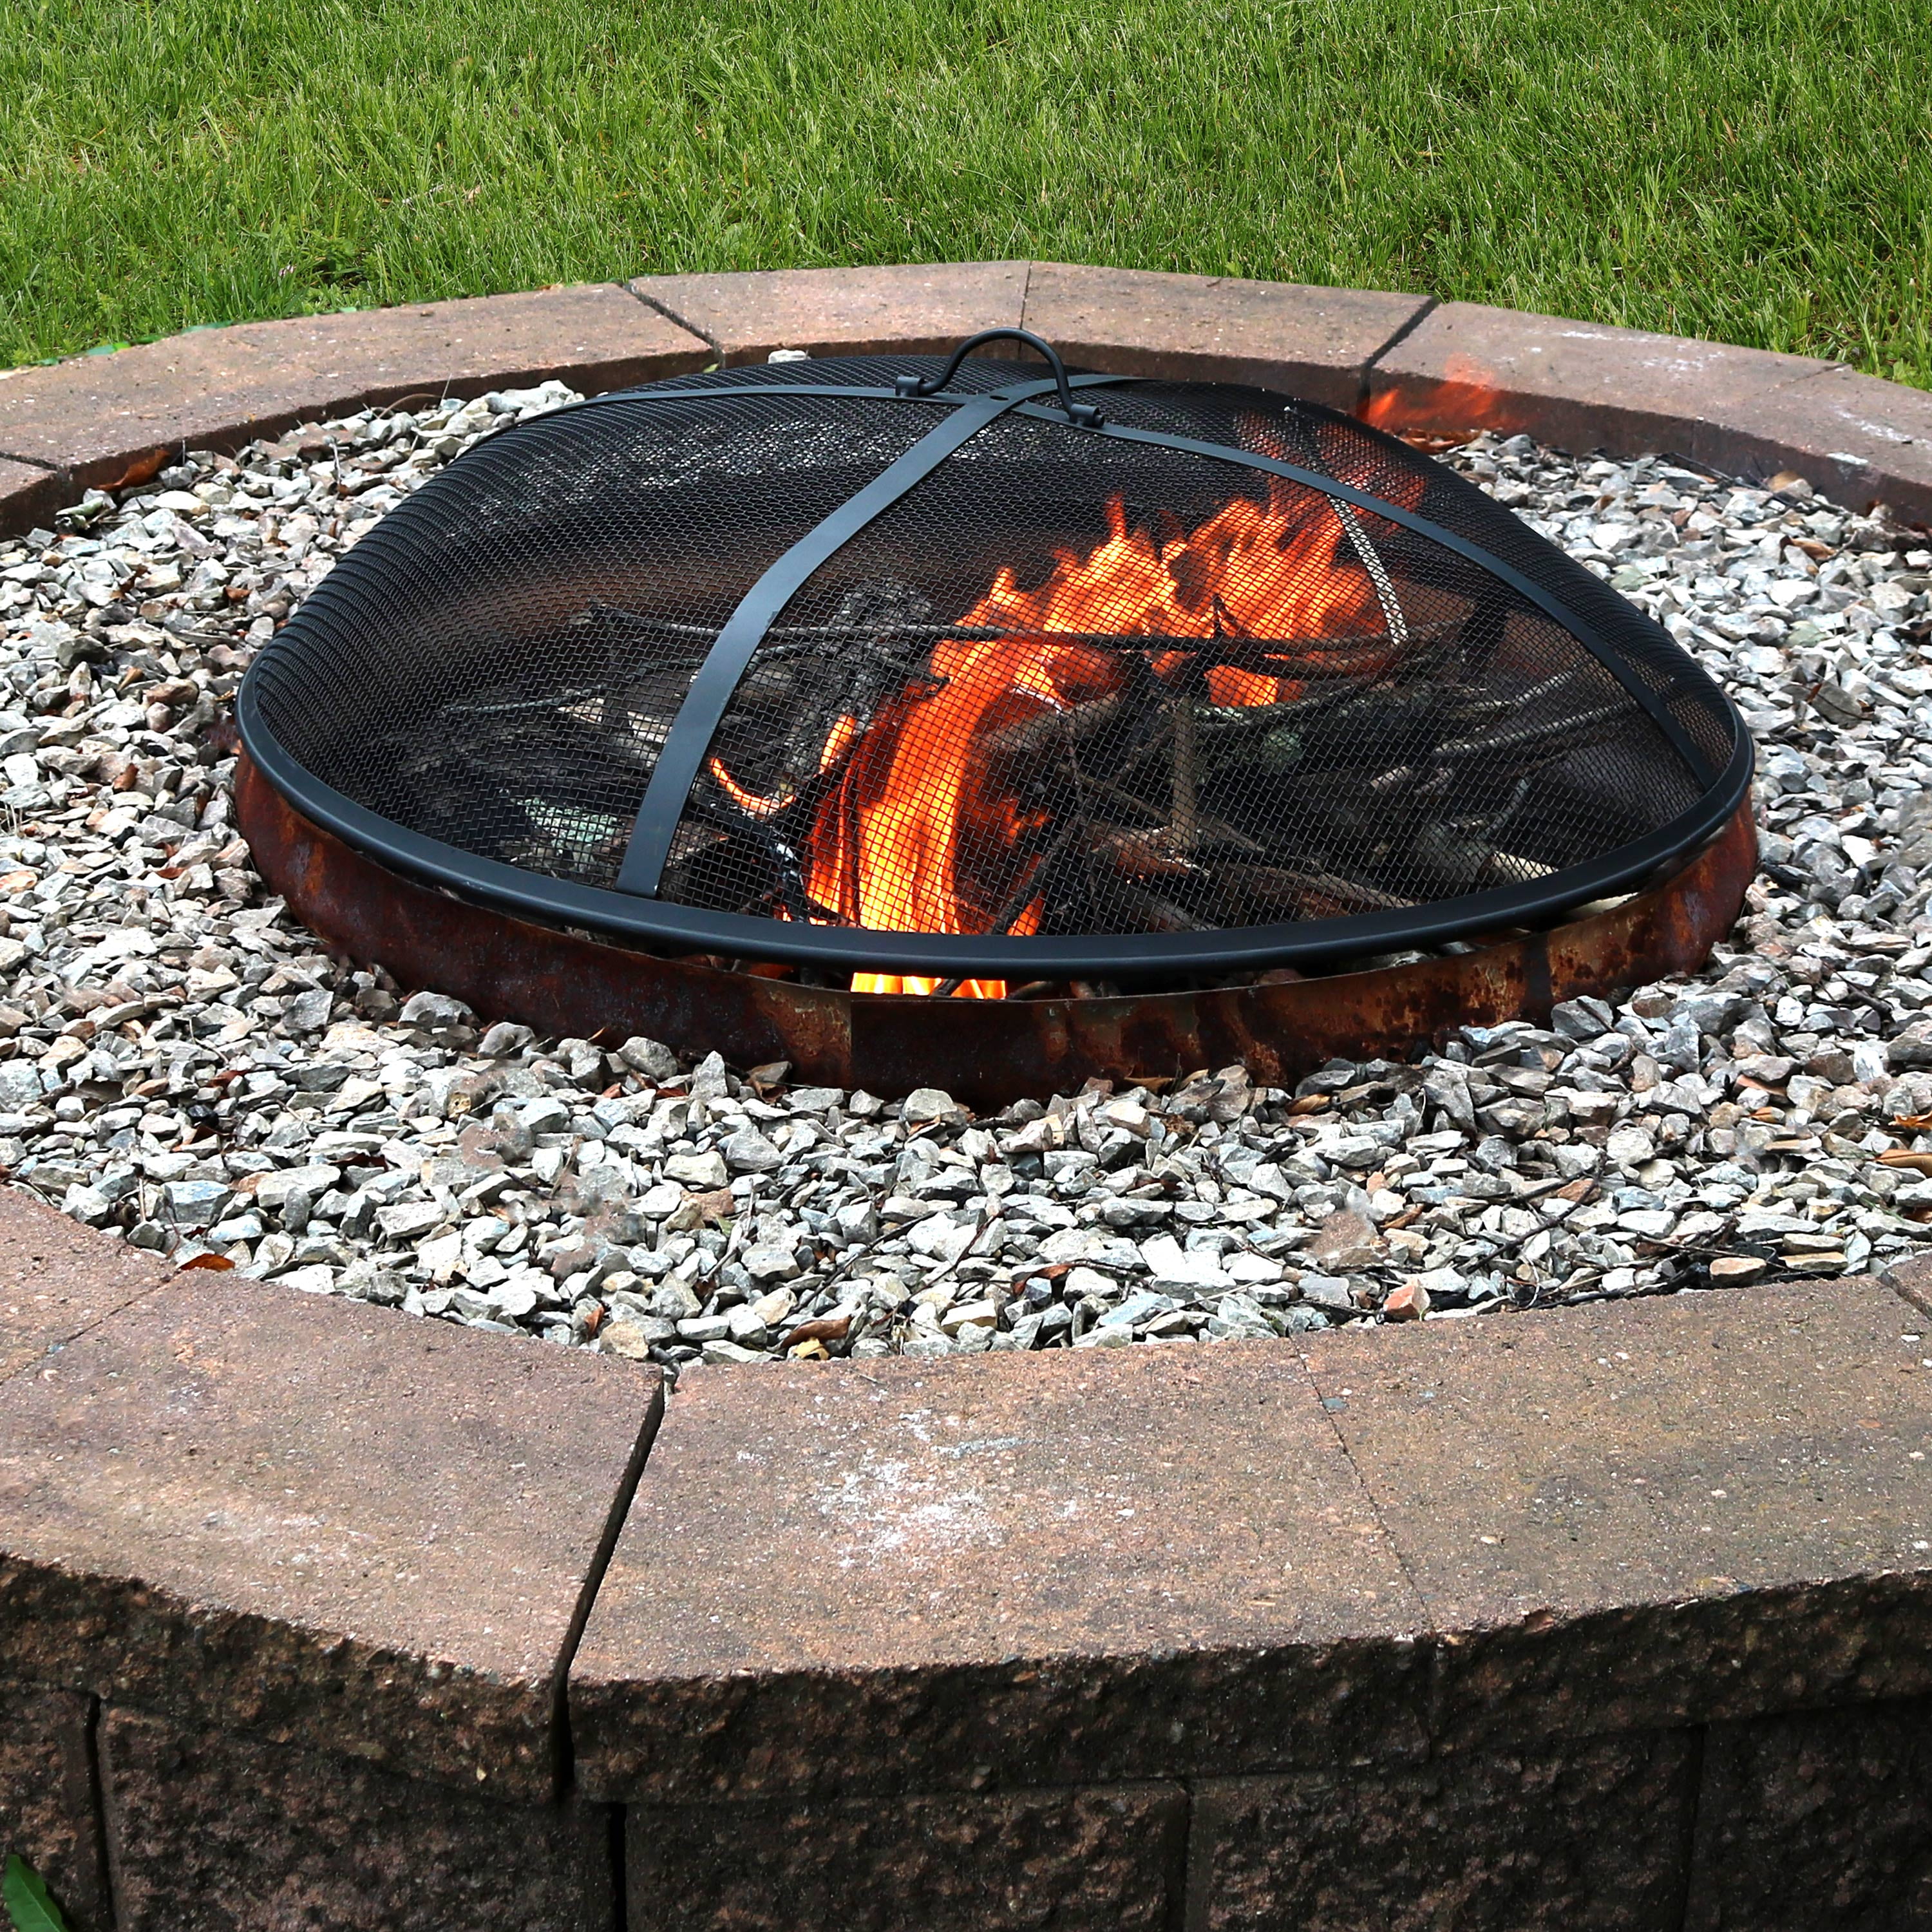 Sunnydaze Outdoor Fire Pit Spark Screen, Metal Dome Fire Pit Cover